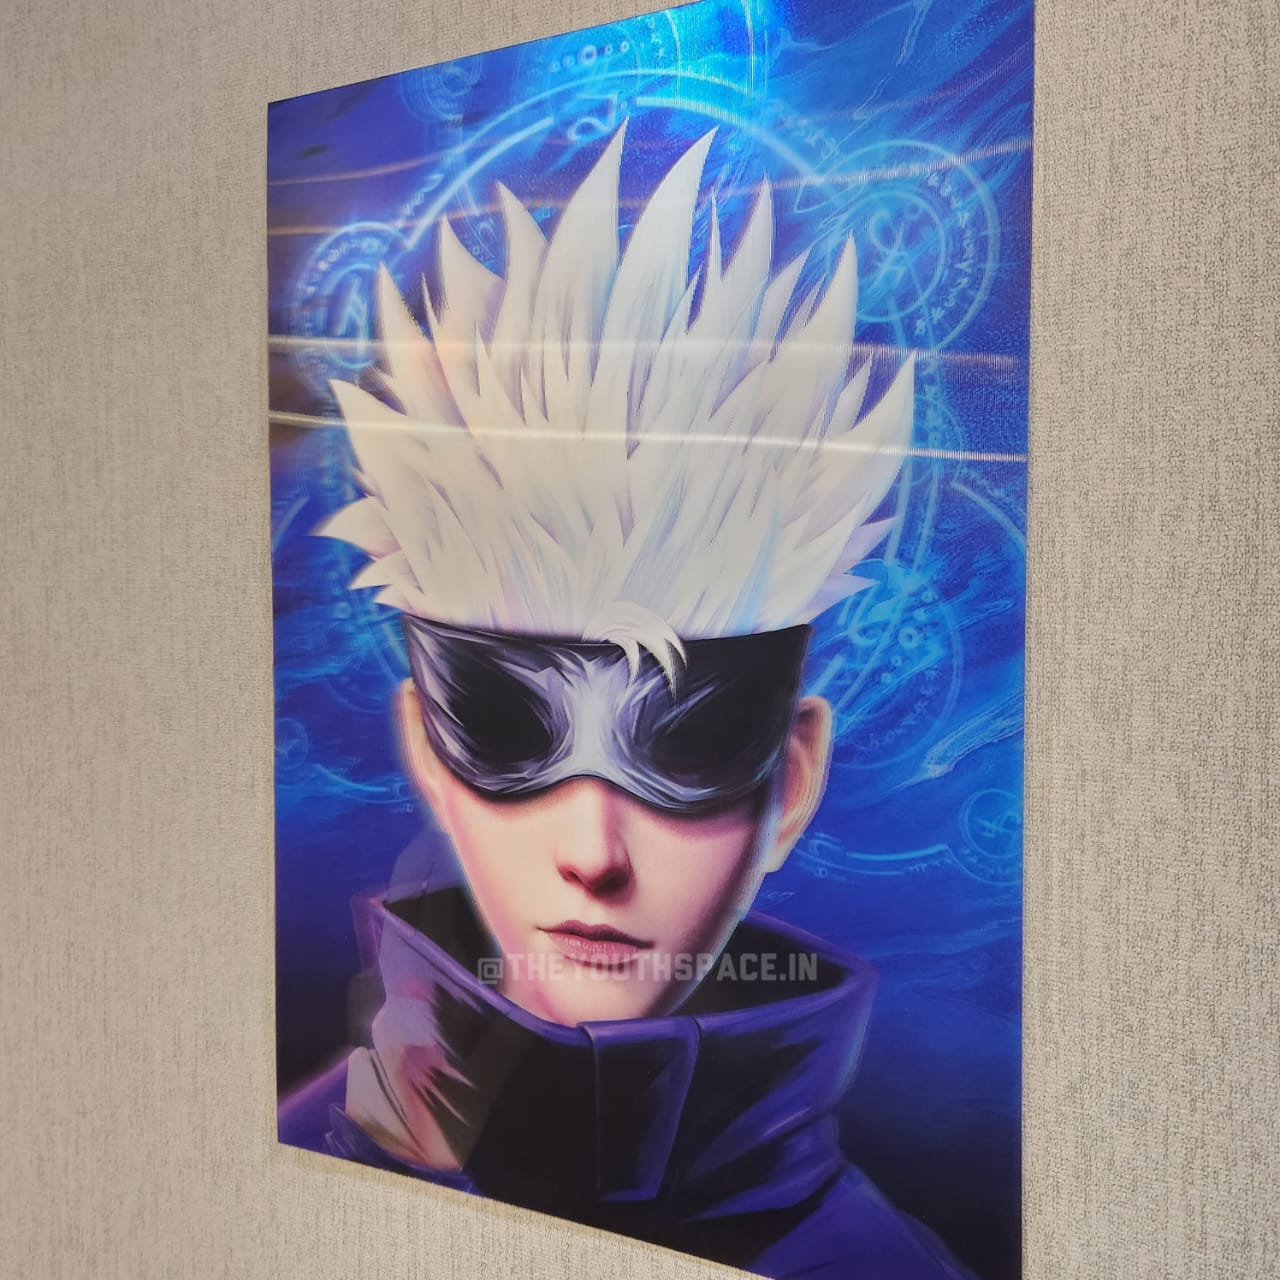 Offo Naruto Anime 3D Poster  3D Wall Art Poster for Anime Fans Perfect  for decorating bedrooms living rooms and other spaces Without Frame  Naruto 3D Poster  A  Amazonin Home